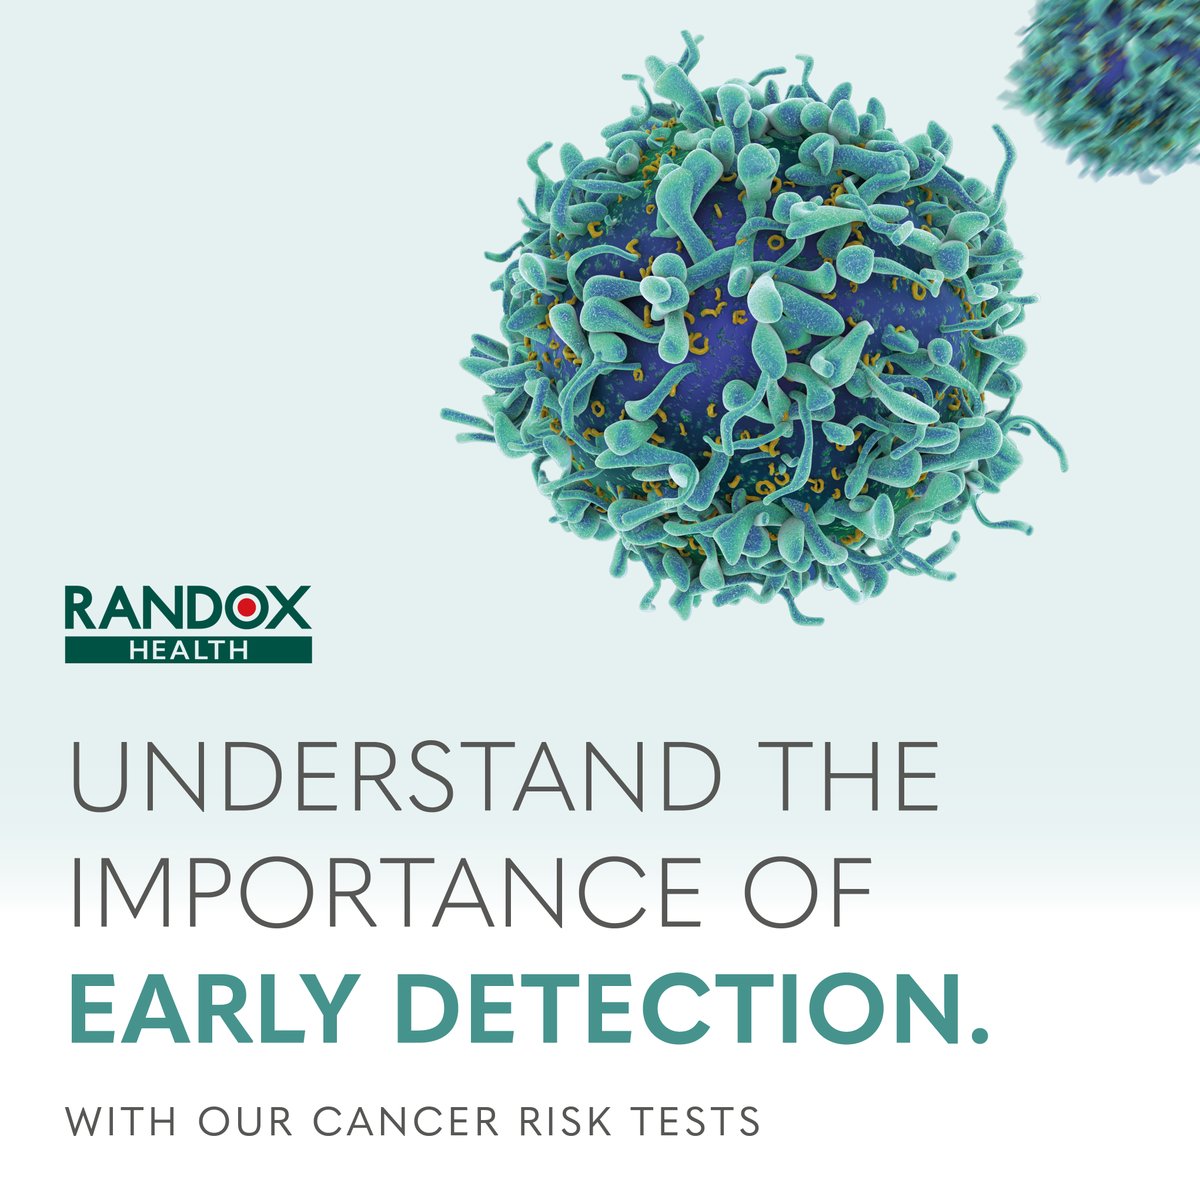 Early detection of cancer can be lifesaving. We stress the importance of preventative health checks at any stage of life. Find out more about cancer risk testing today at randoxhealth.com #cancer #cancerrisk #cancerawareness #cancergene